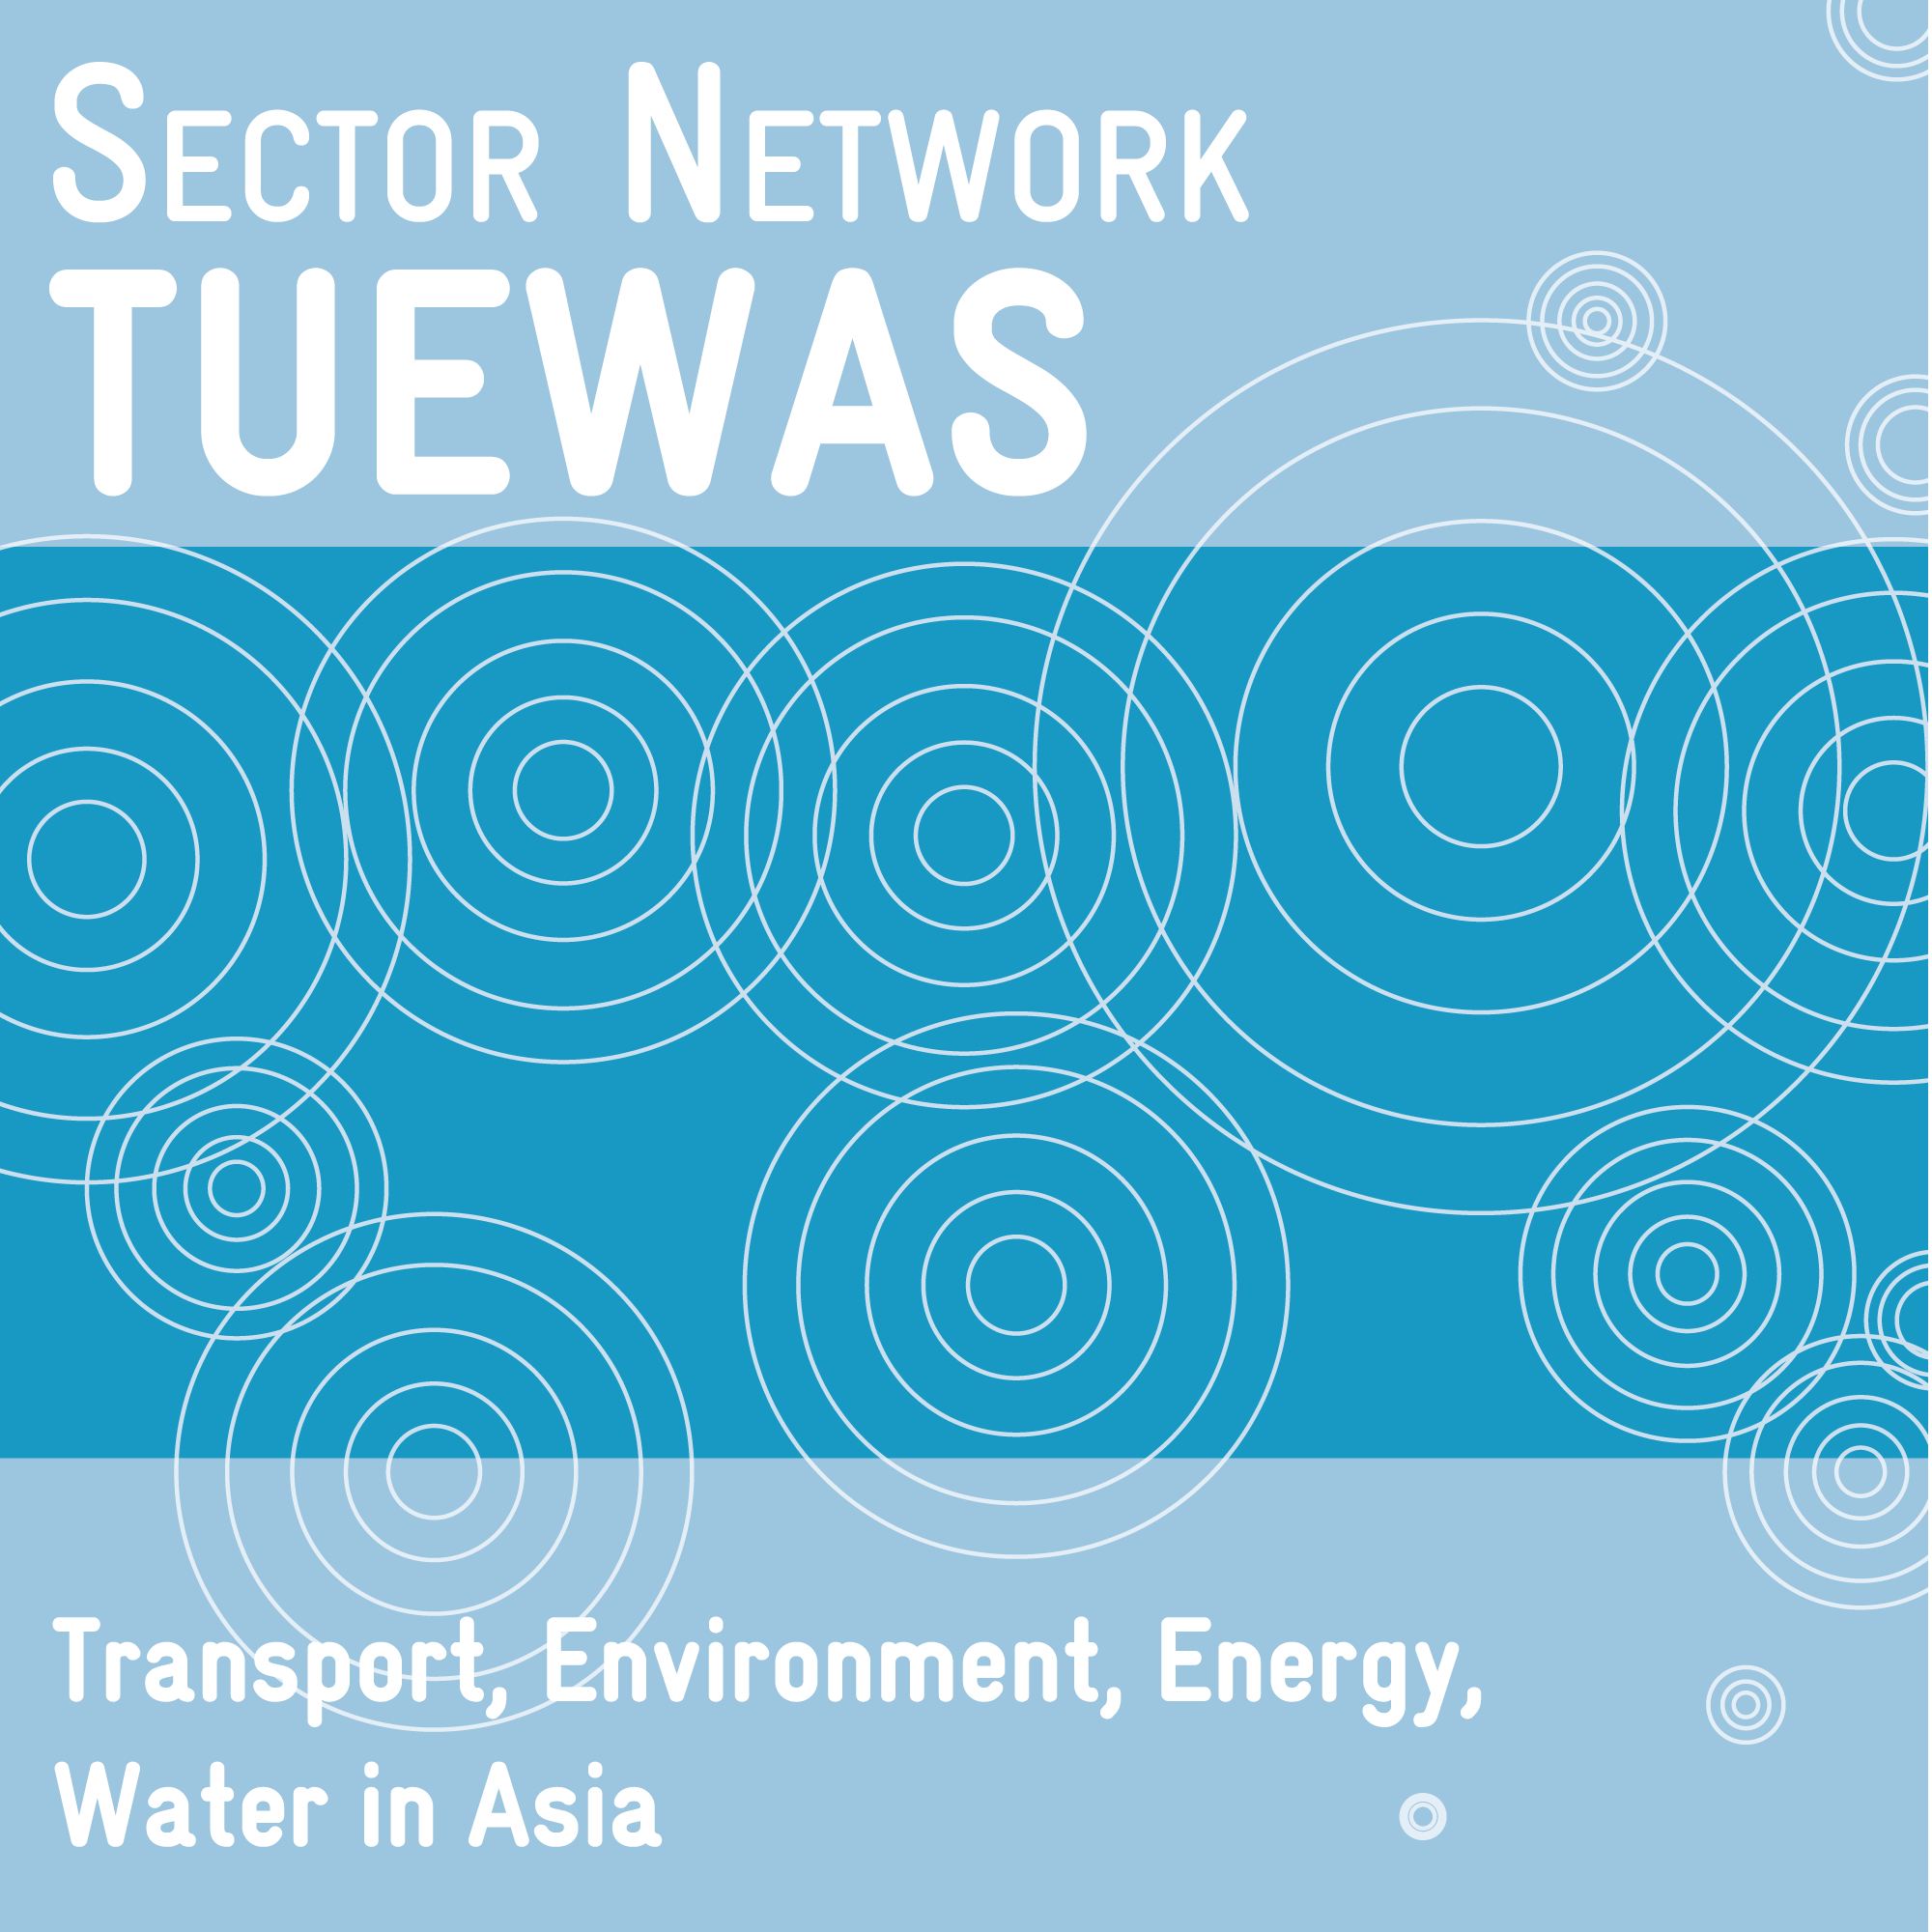 TUEWAS (Transport, Environment, Energy and Water in Asia)